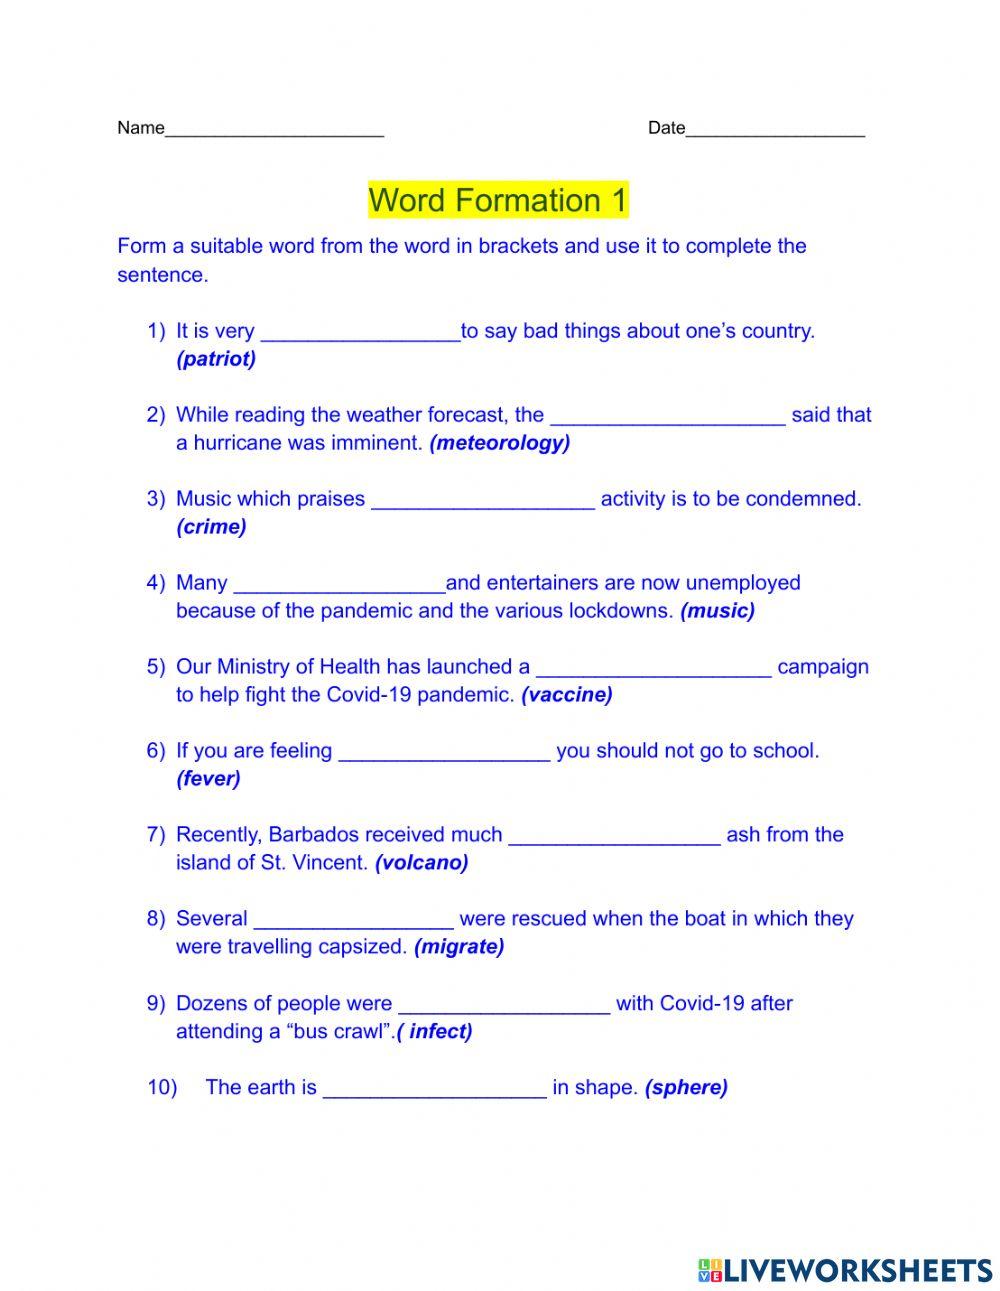 Word Formation 1